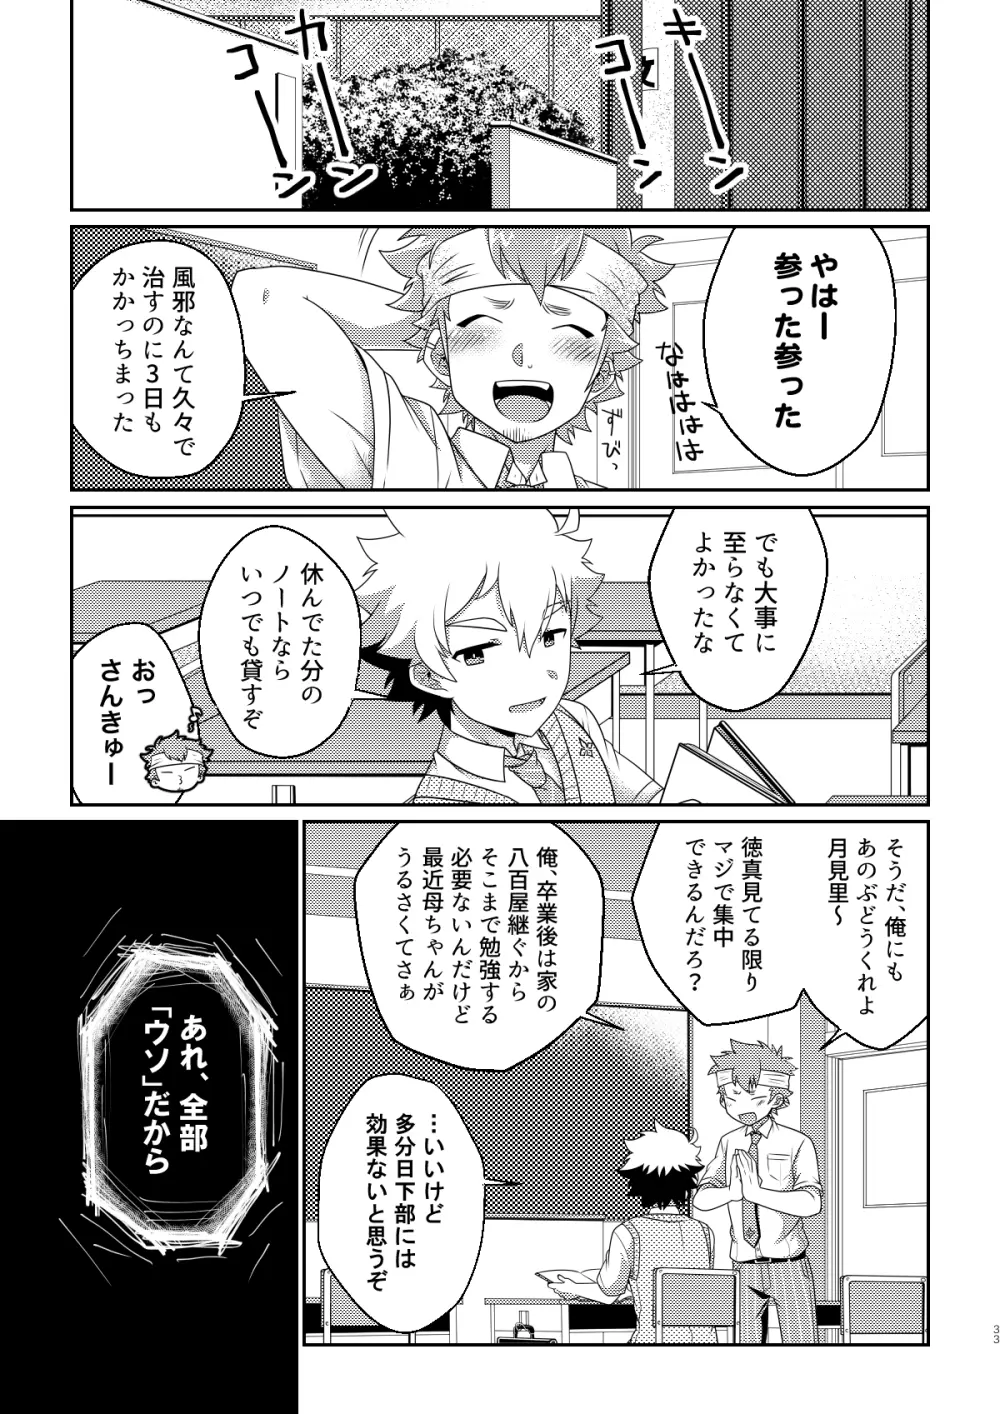 intoxication Page.32